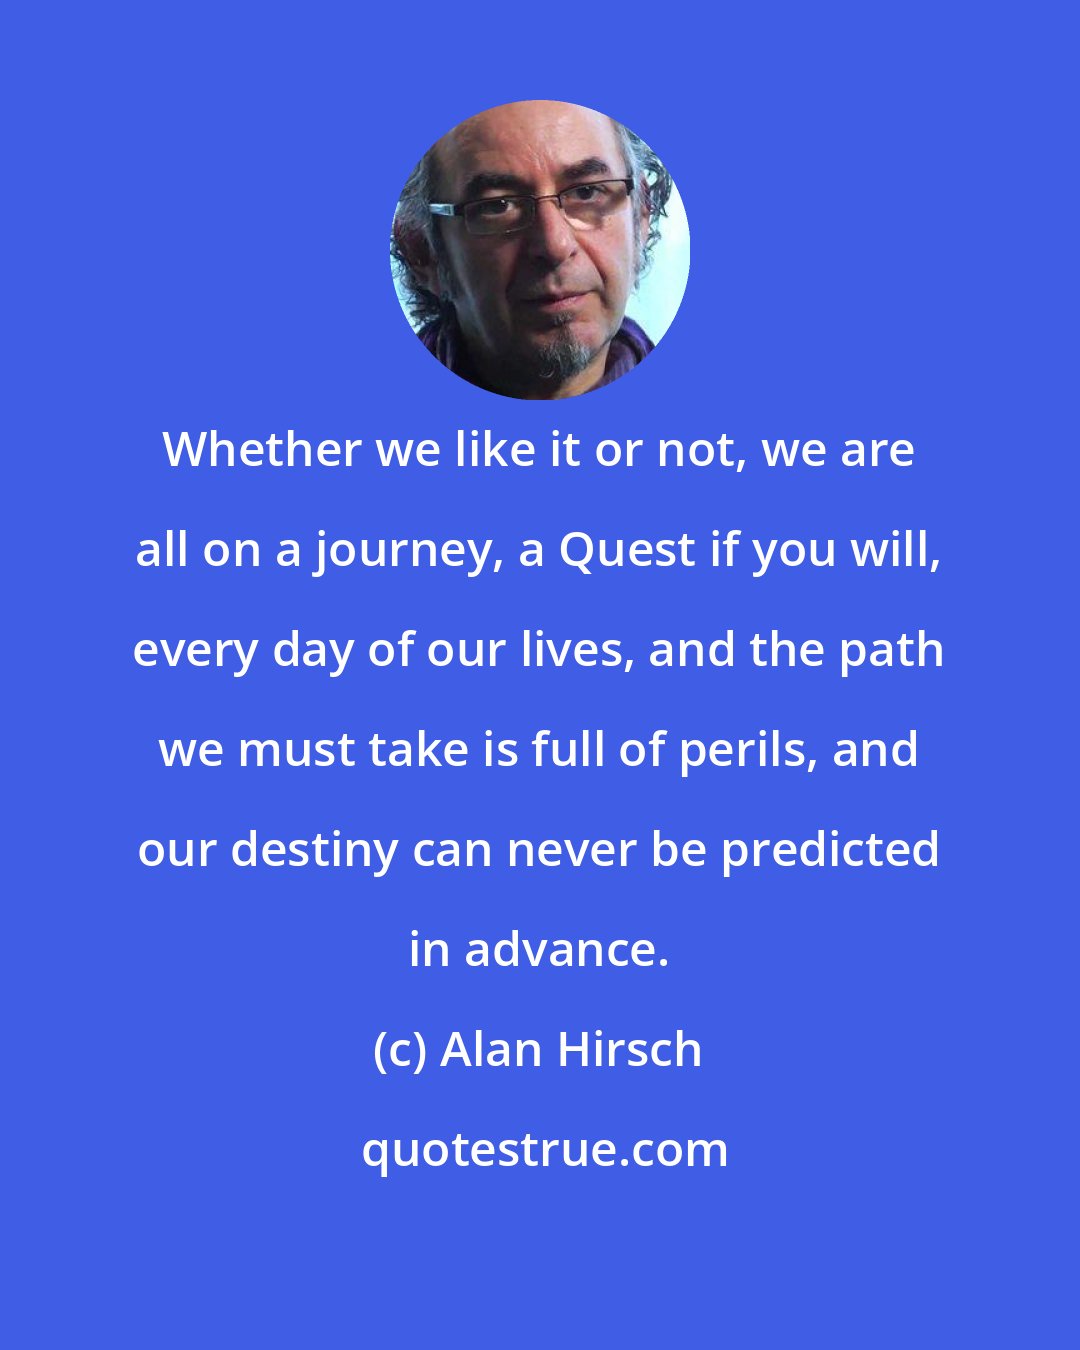 Alan Hirsch: Whether we like it or not, we are all on a journey, a Quest if you will, every day of our lives, and the path we must take is full of perils, and our destiny can never be predicted in advance.